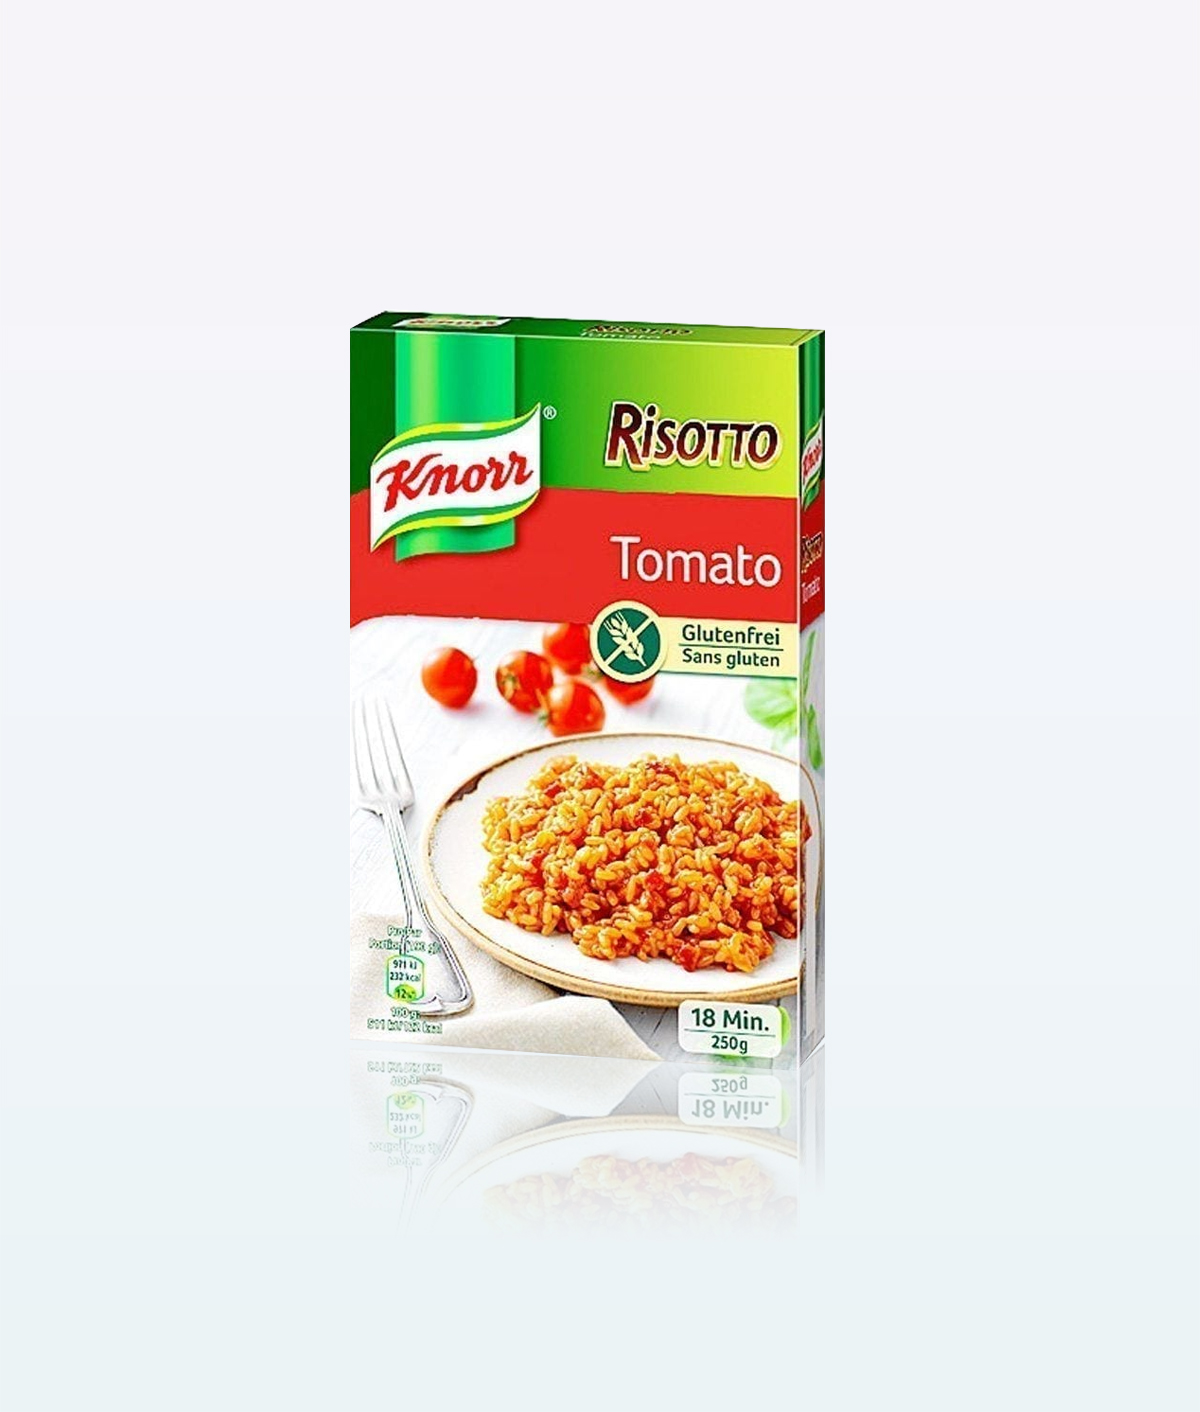 Knorr-Risotto-tomate